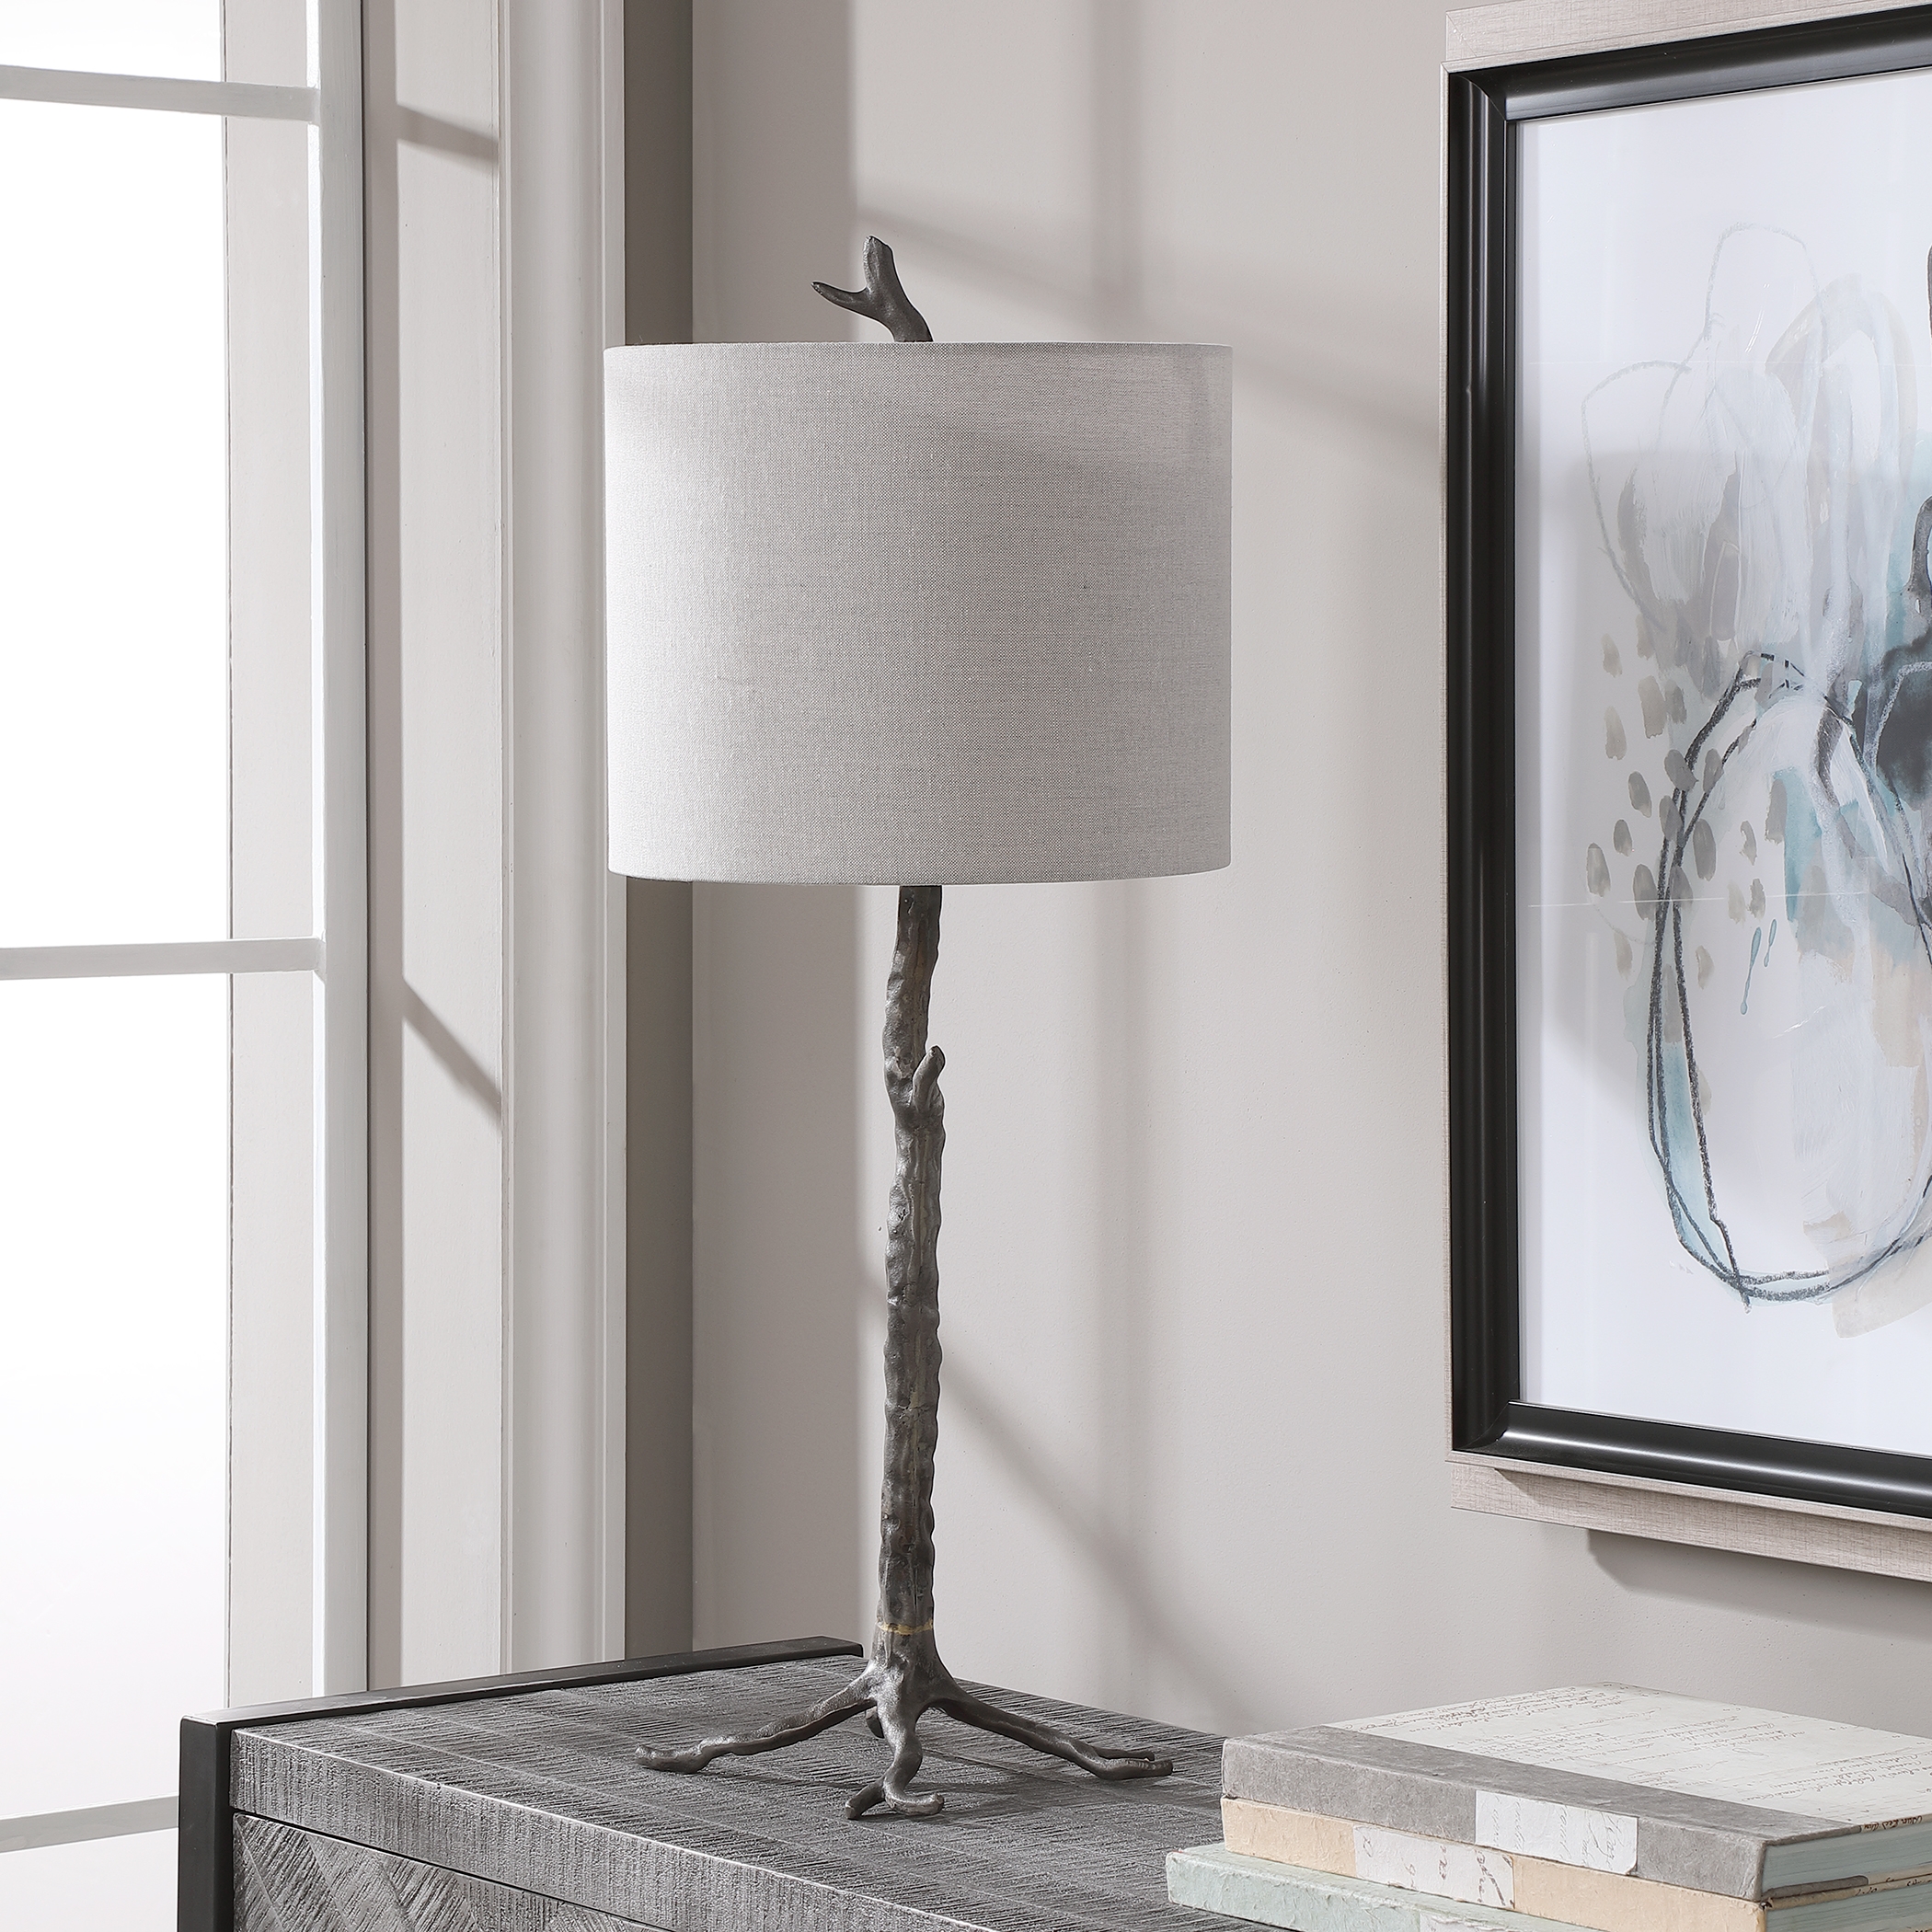 TABLE LAMP - Image 1